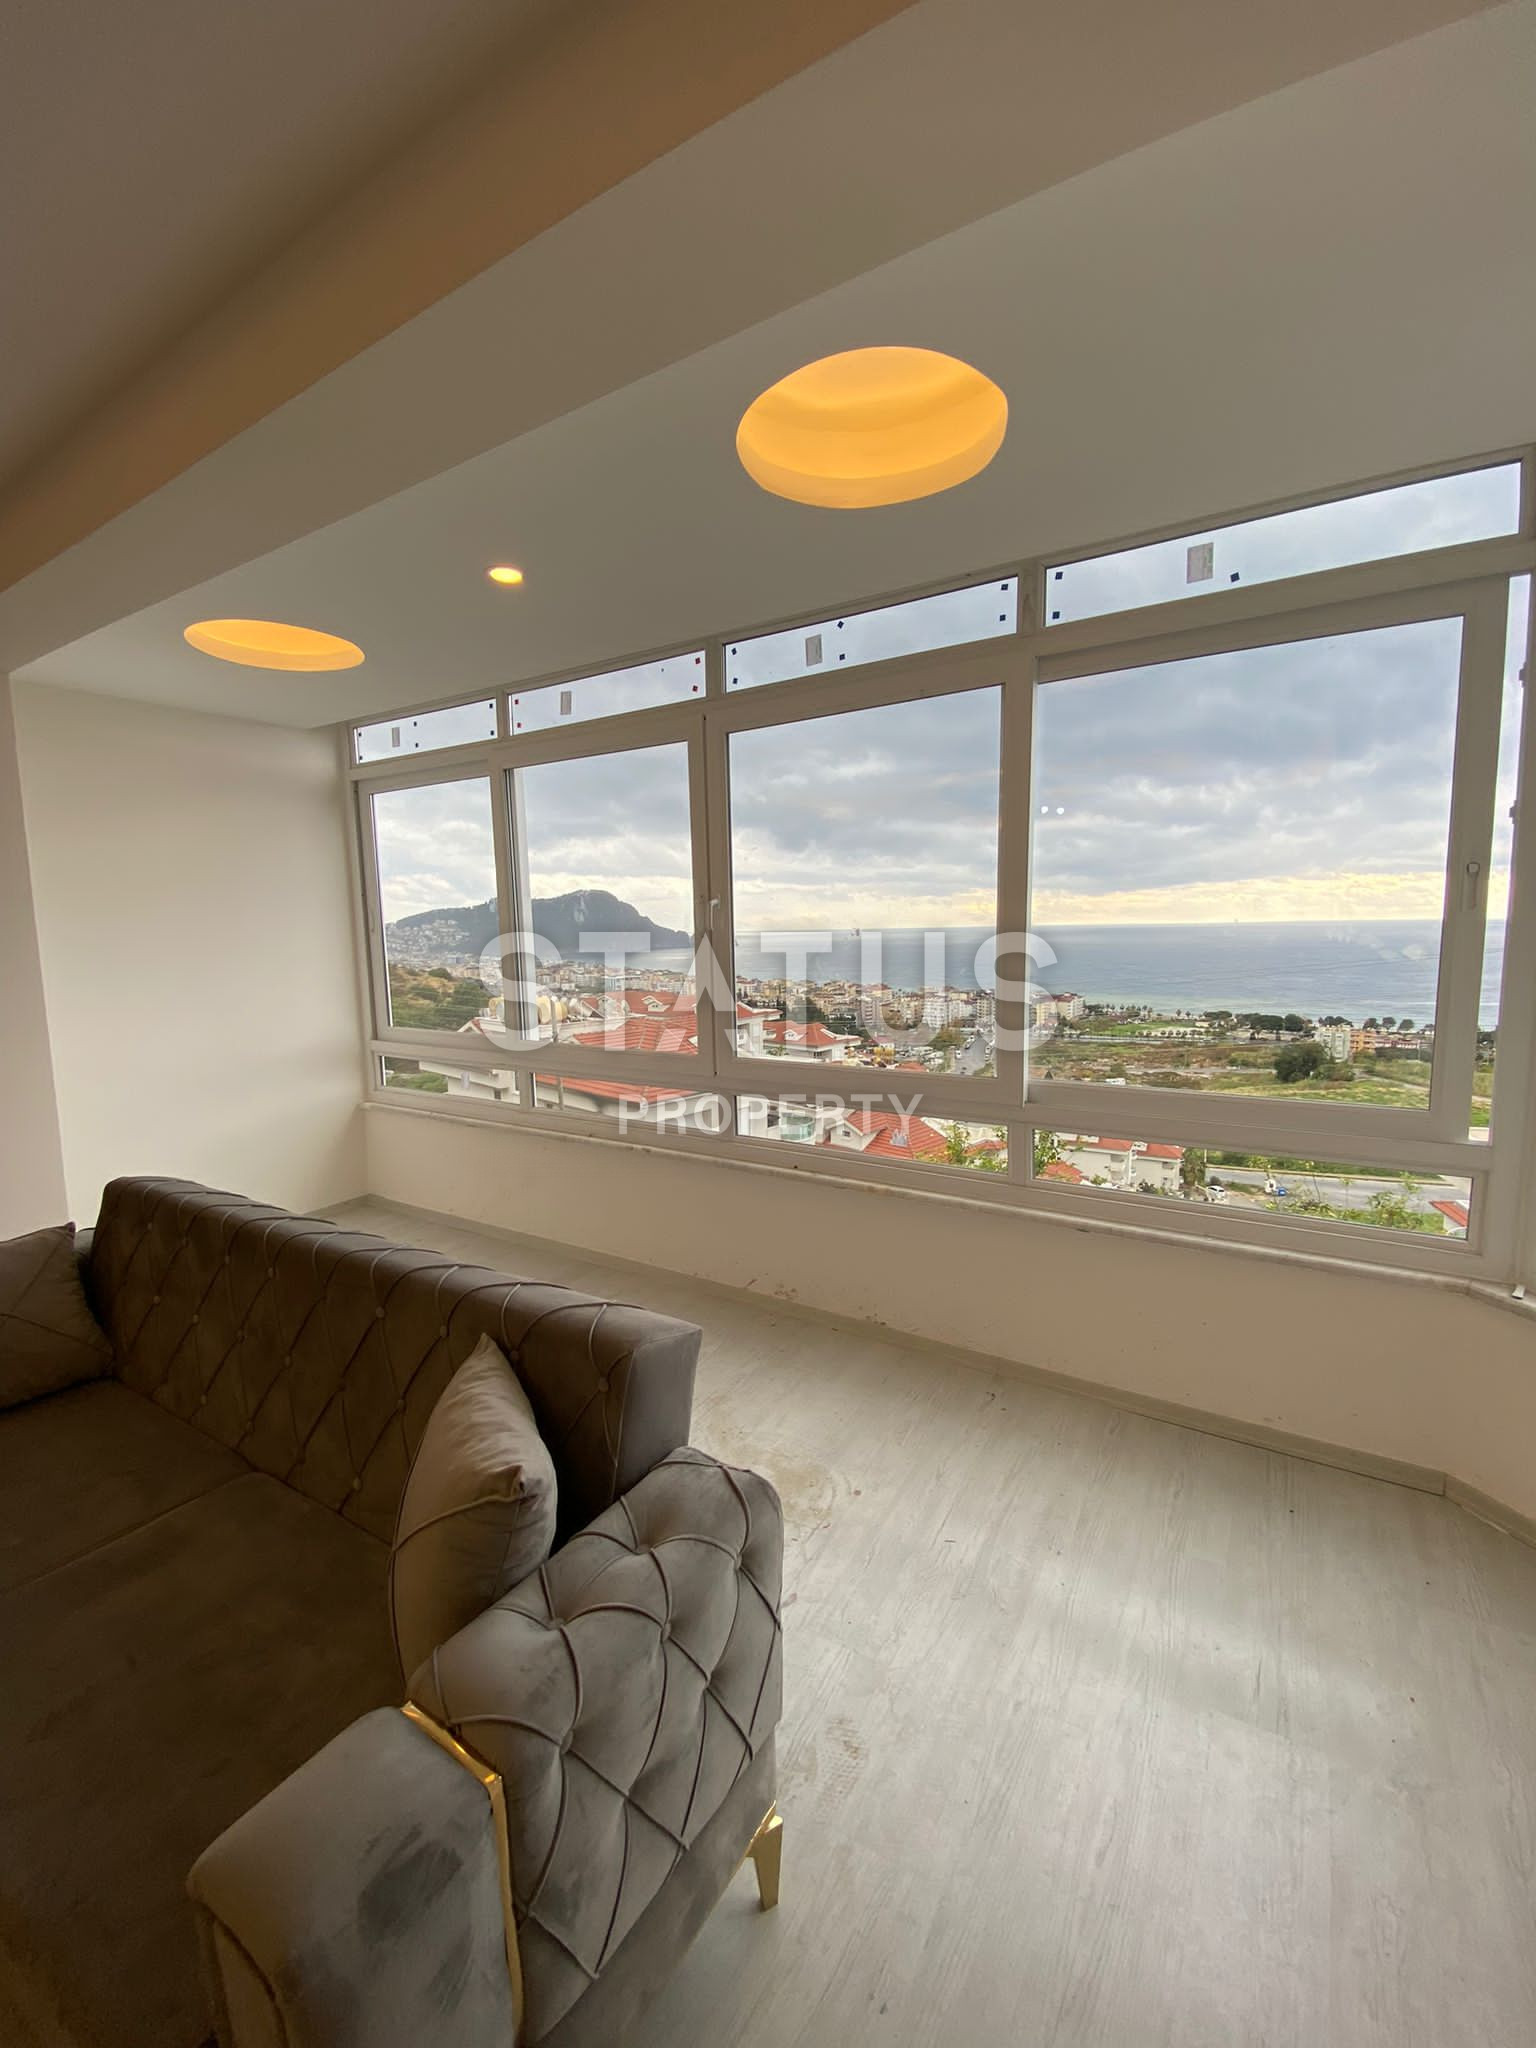 Spacious 3+1 apartment with a great view at a great price in Alanya. 160m2 фото 1